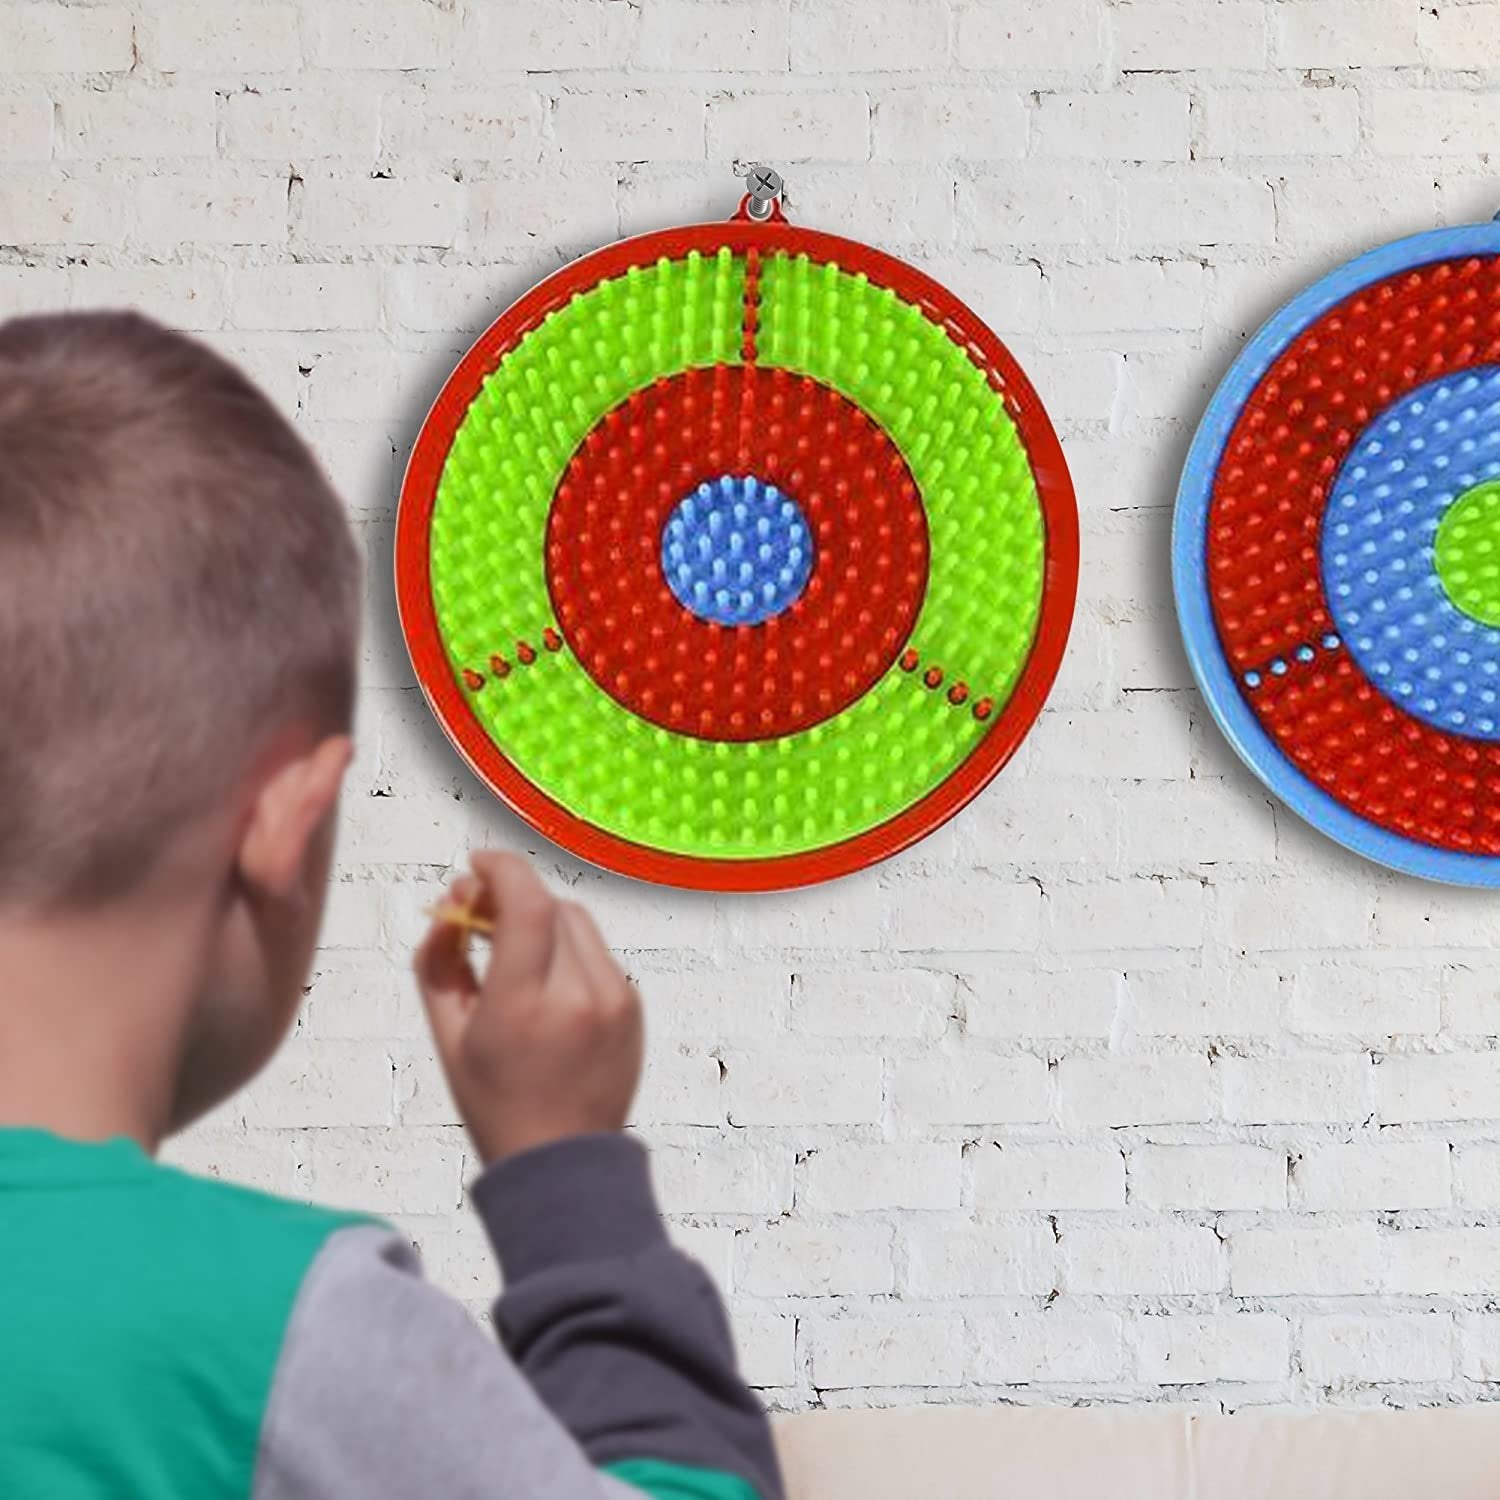 Gamie Dart Board Set for Kids - Includes 3 Dartboards and 6 Darts - Kid Safe Dartboard Kit for Boys and Girls - Great Gift, Party Activity, Bedroom Wall Decor Idea - Red, Blue and Green